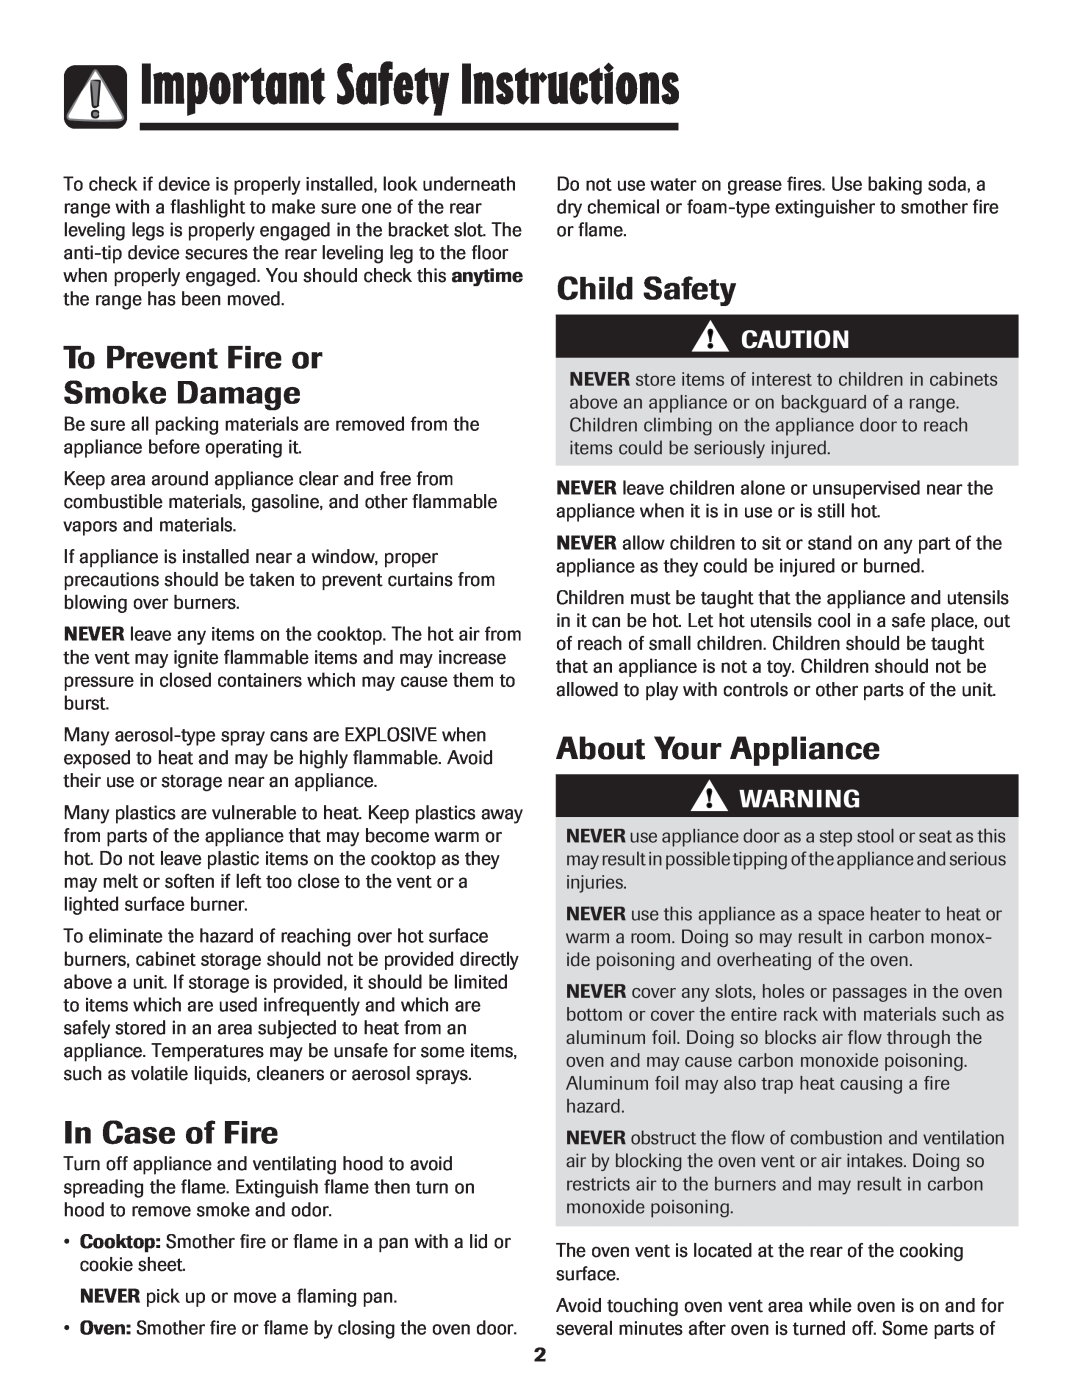 Magic Chef 500 Important Safety Instructions, To Prevent Fire or Smoke Damage, In Case of Fire, Child Safety 